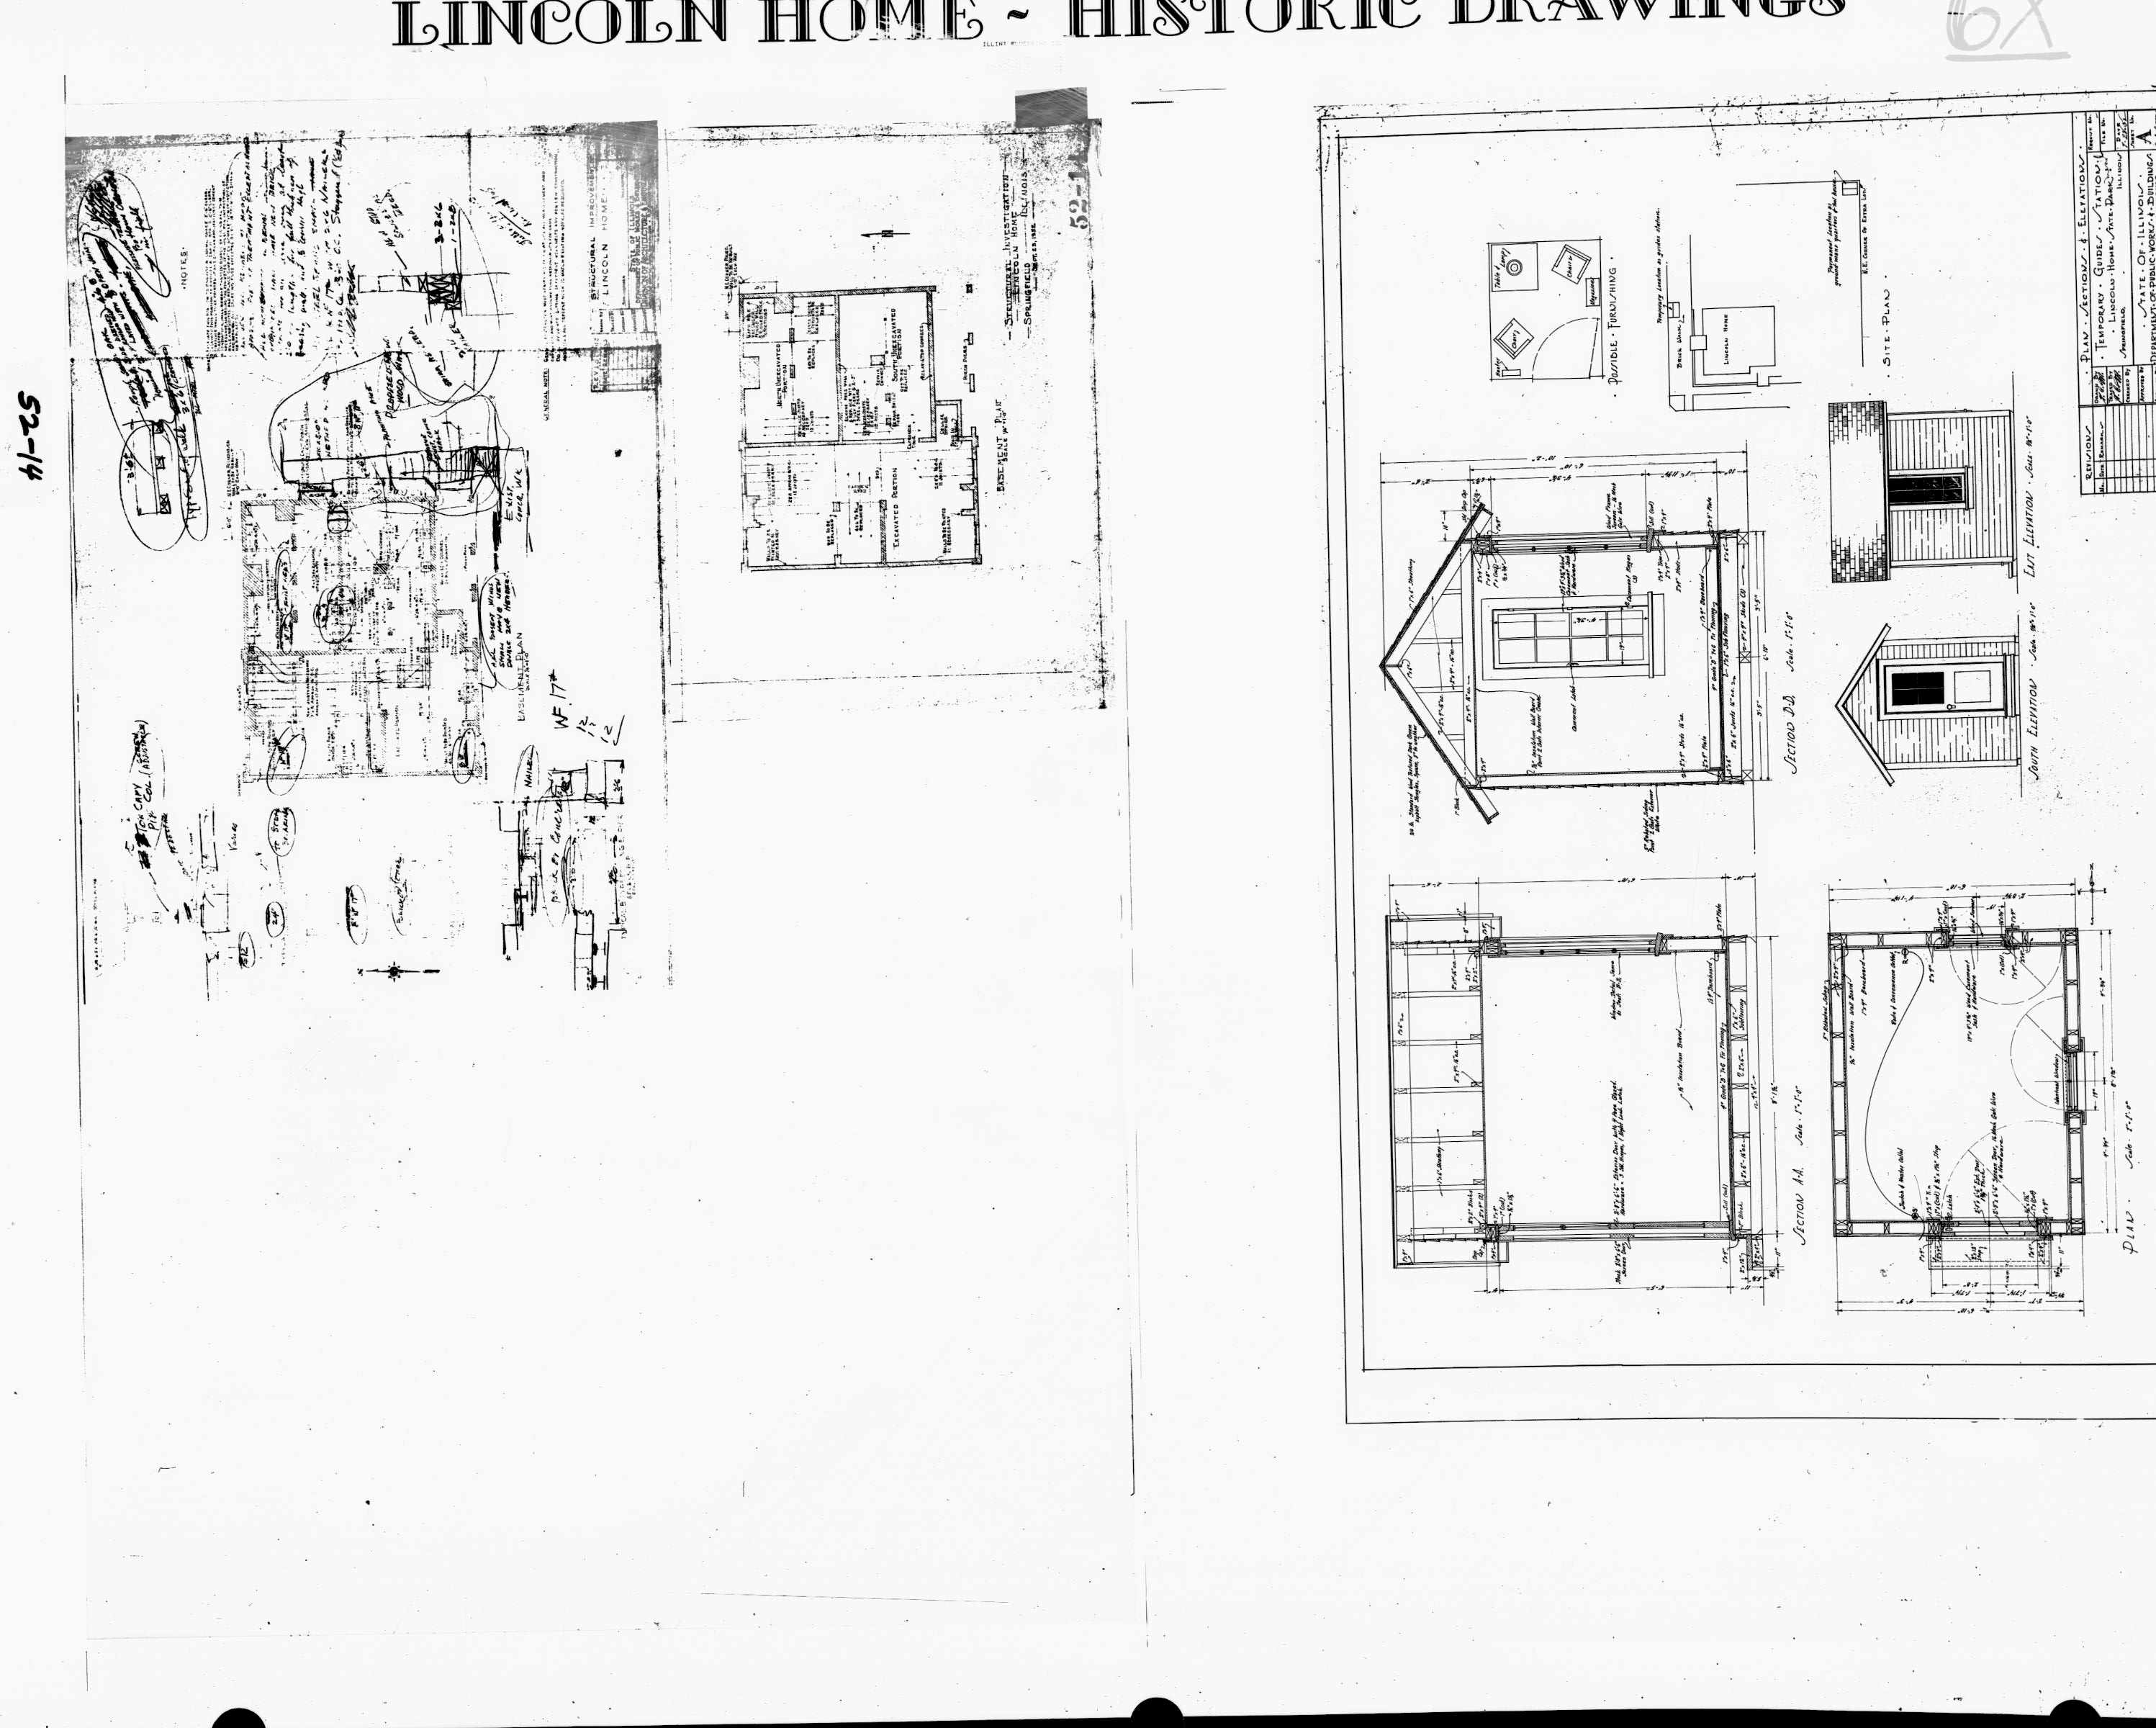 Lincoln Home - Historic Drawings  34 Lincoln, home, historic drawings, structural improvements, basement plan, guide station